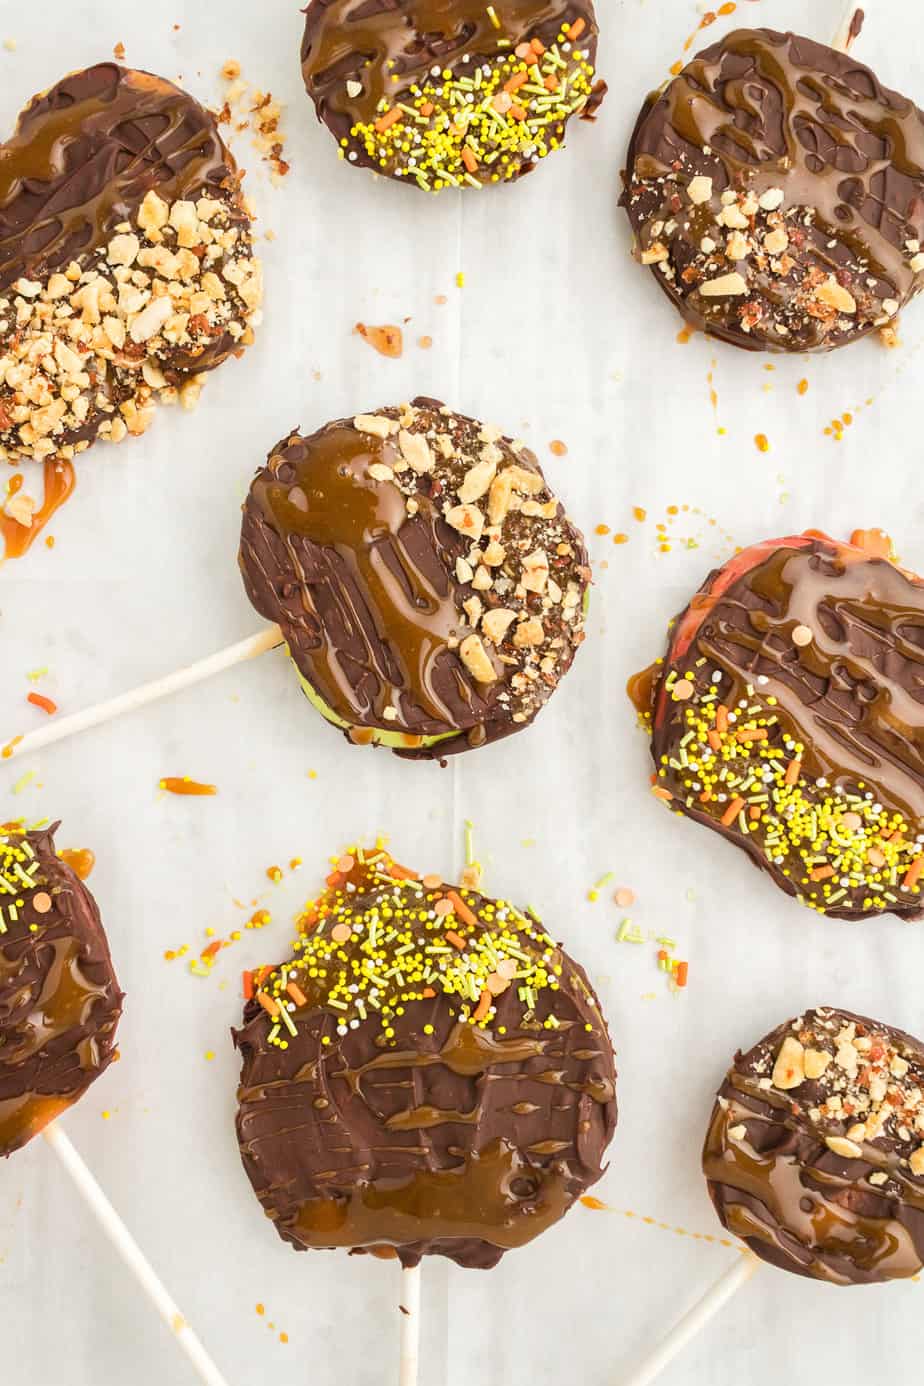 Apple slices with sticks coated in chocolate, caramel nuts and sprinkles from overhead close up on parchment paper.